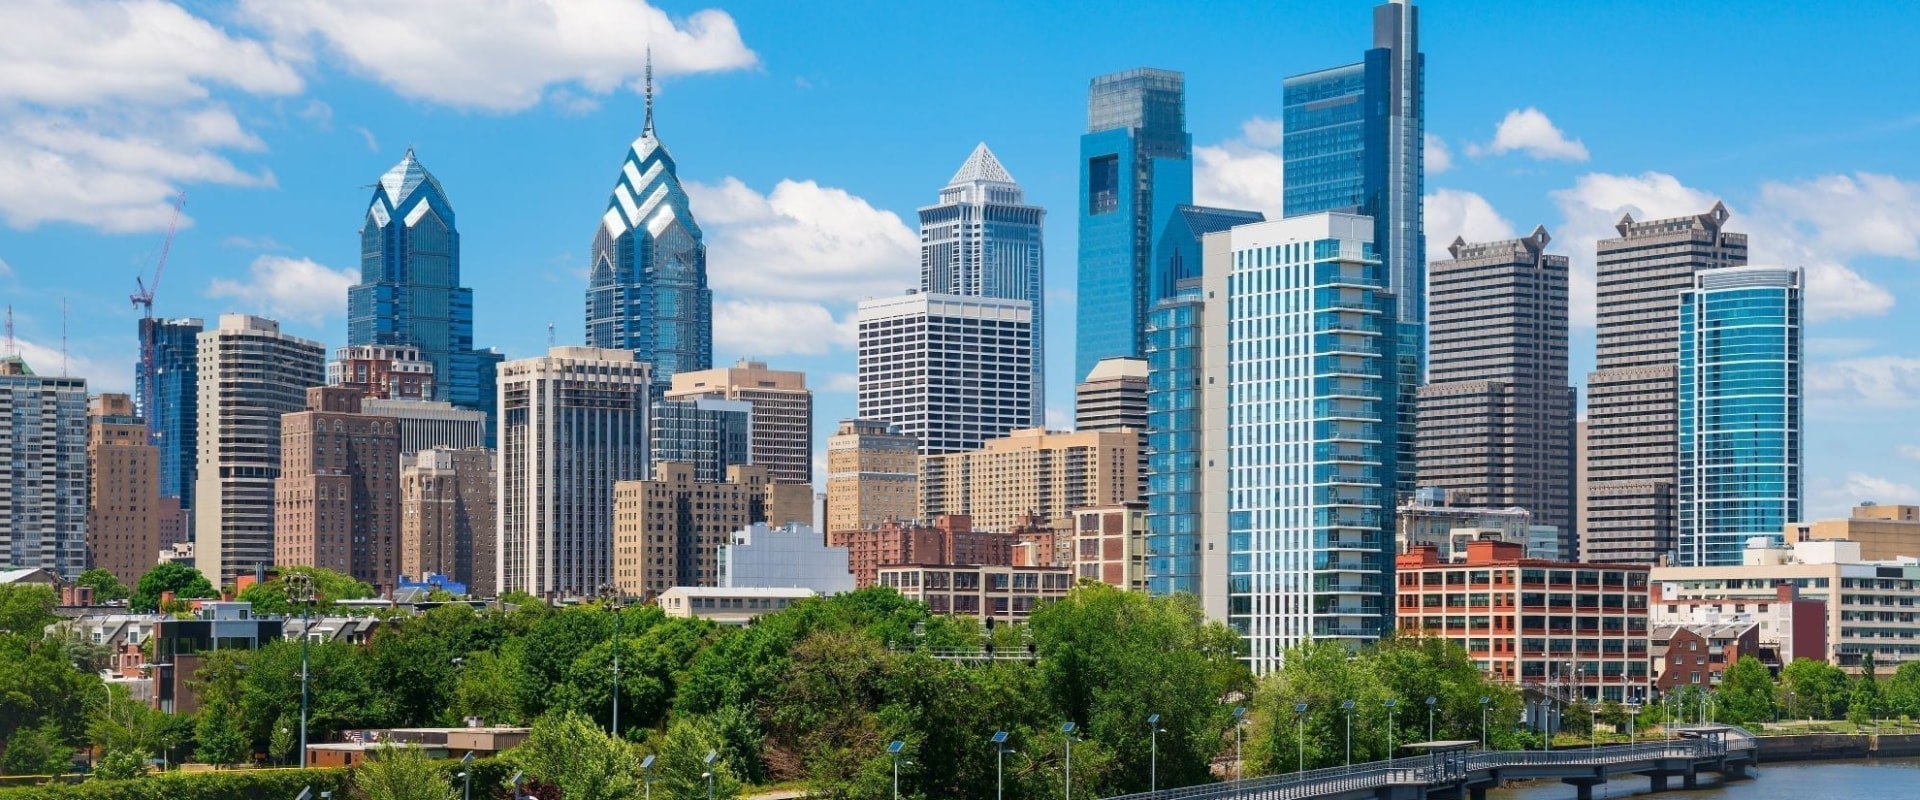 Is philadelphia a good city to live in?